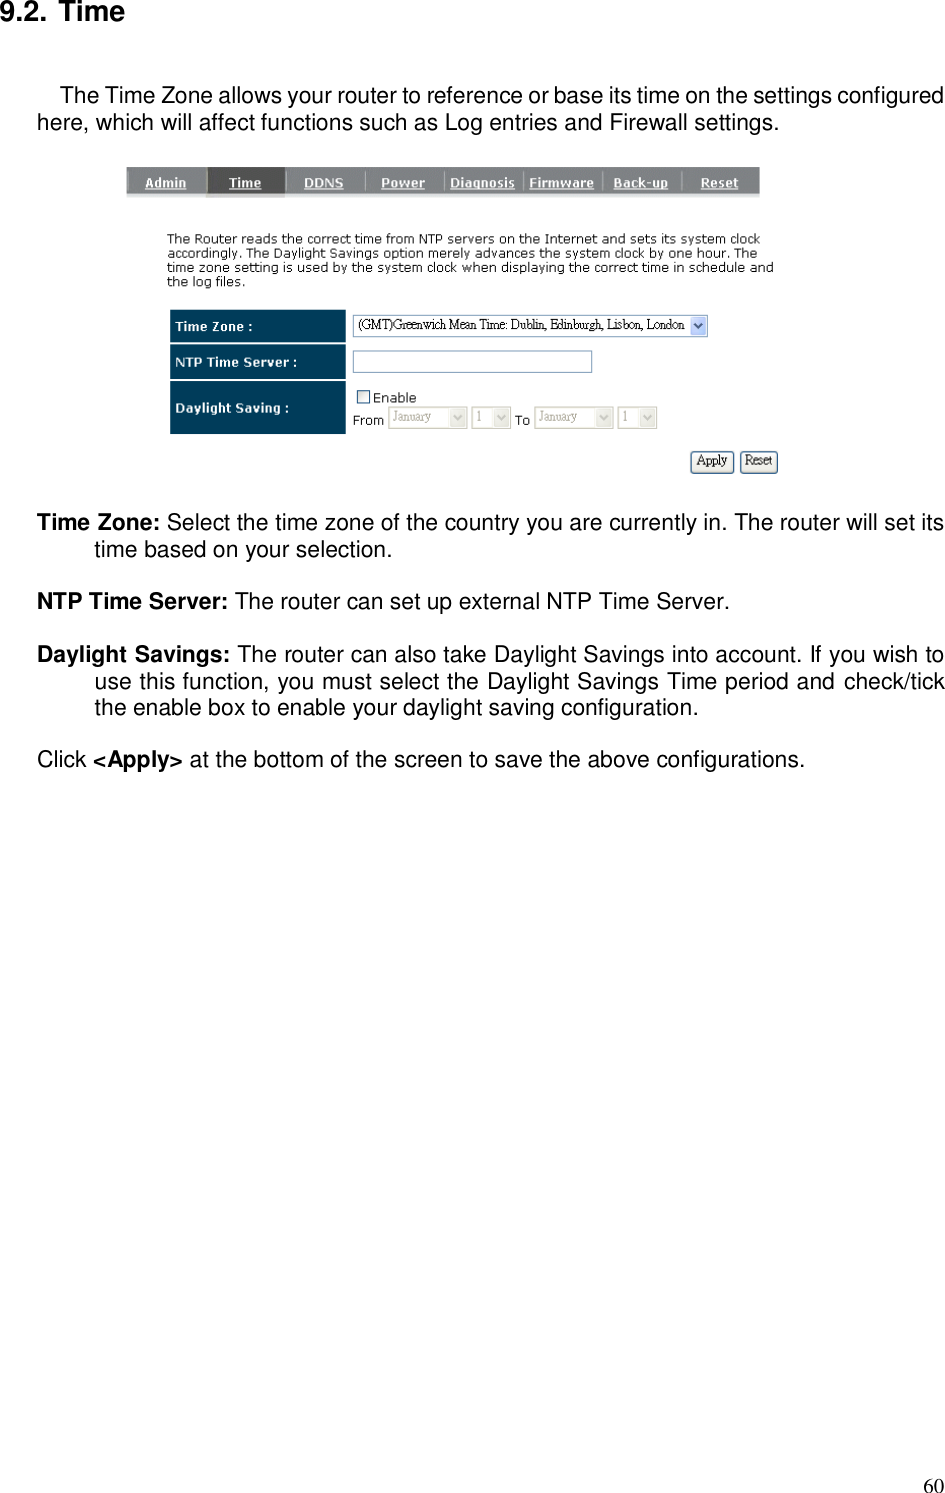  60 9.2. Time  The Time Zone allows your router to reference or base its time on the settings configured here, which will affect functions such as Log entries and Firewall settings.    Time Zone: Select the time zone of the country you are currently in. The router will set its time based on your selection.    NTP Time Server: The router can set up external NTP Time Server.  Daylight Savings: The router can also take Daylight Savings into account. If you wish to use this function, you must select the Daylight Savings Time period and check/tick the enable box to enable your daylight saving configuration.  Click &lt;Apply&gt; at the bottom of the screen to save the above configurations. 